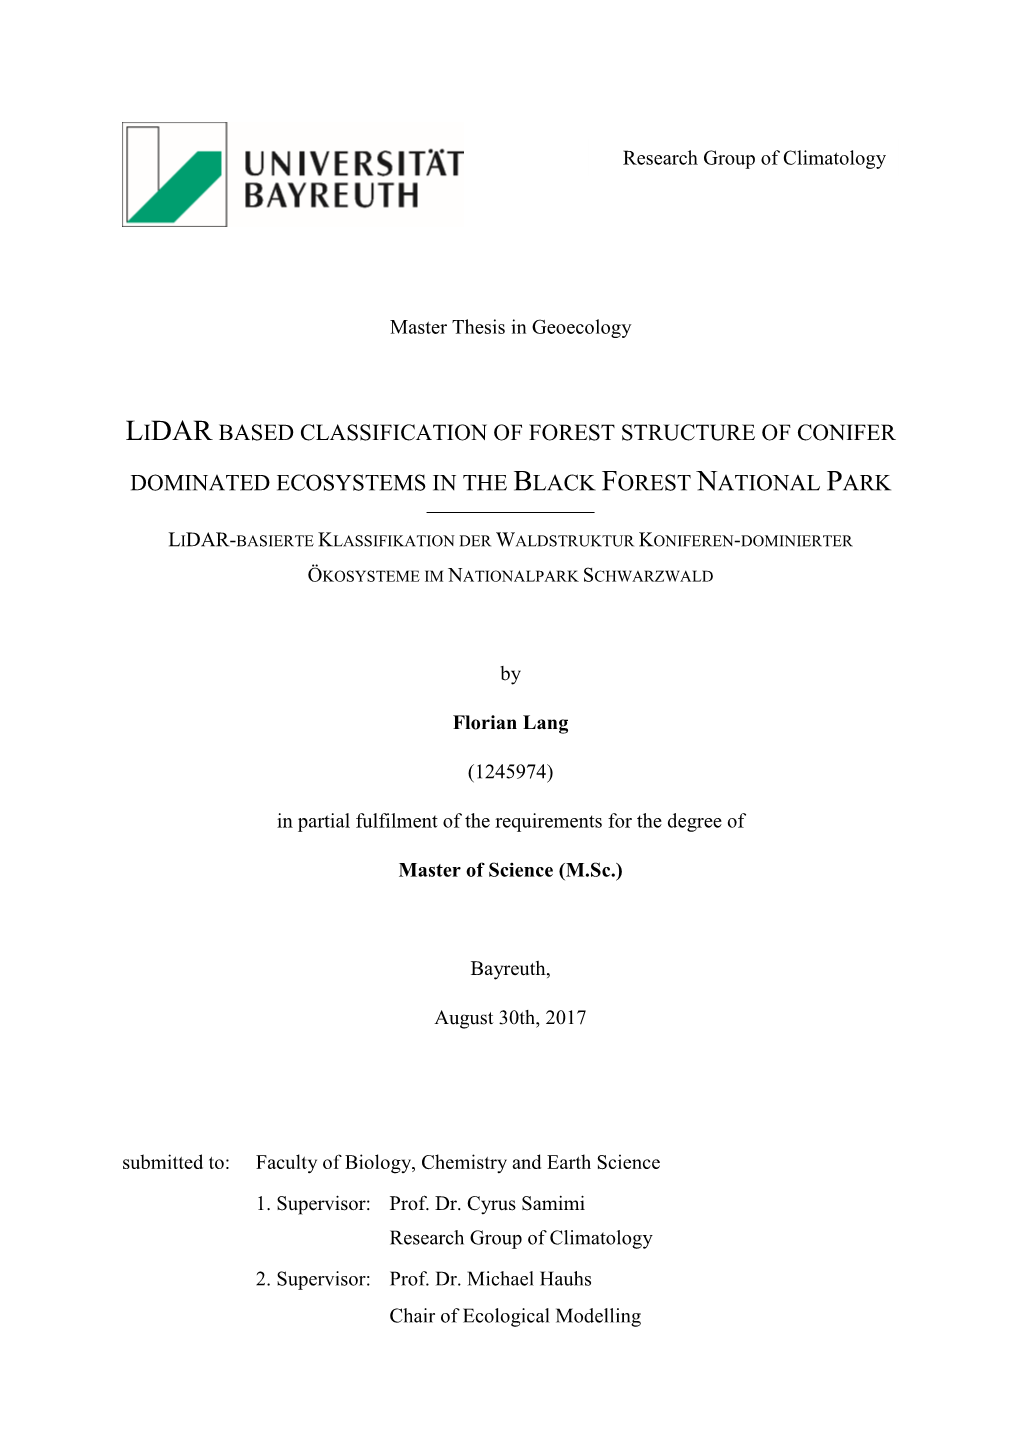 Lidar Based Classification of Forest Structure of Conifer